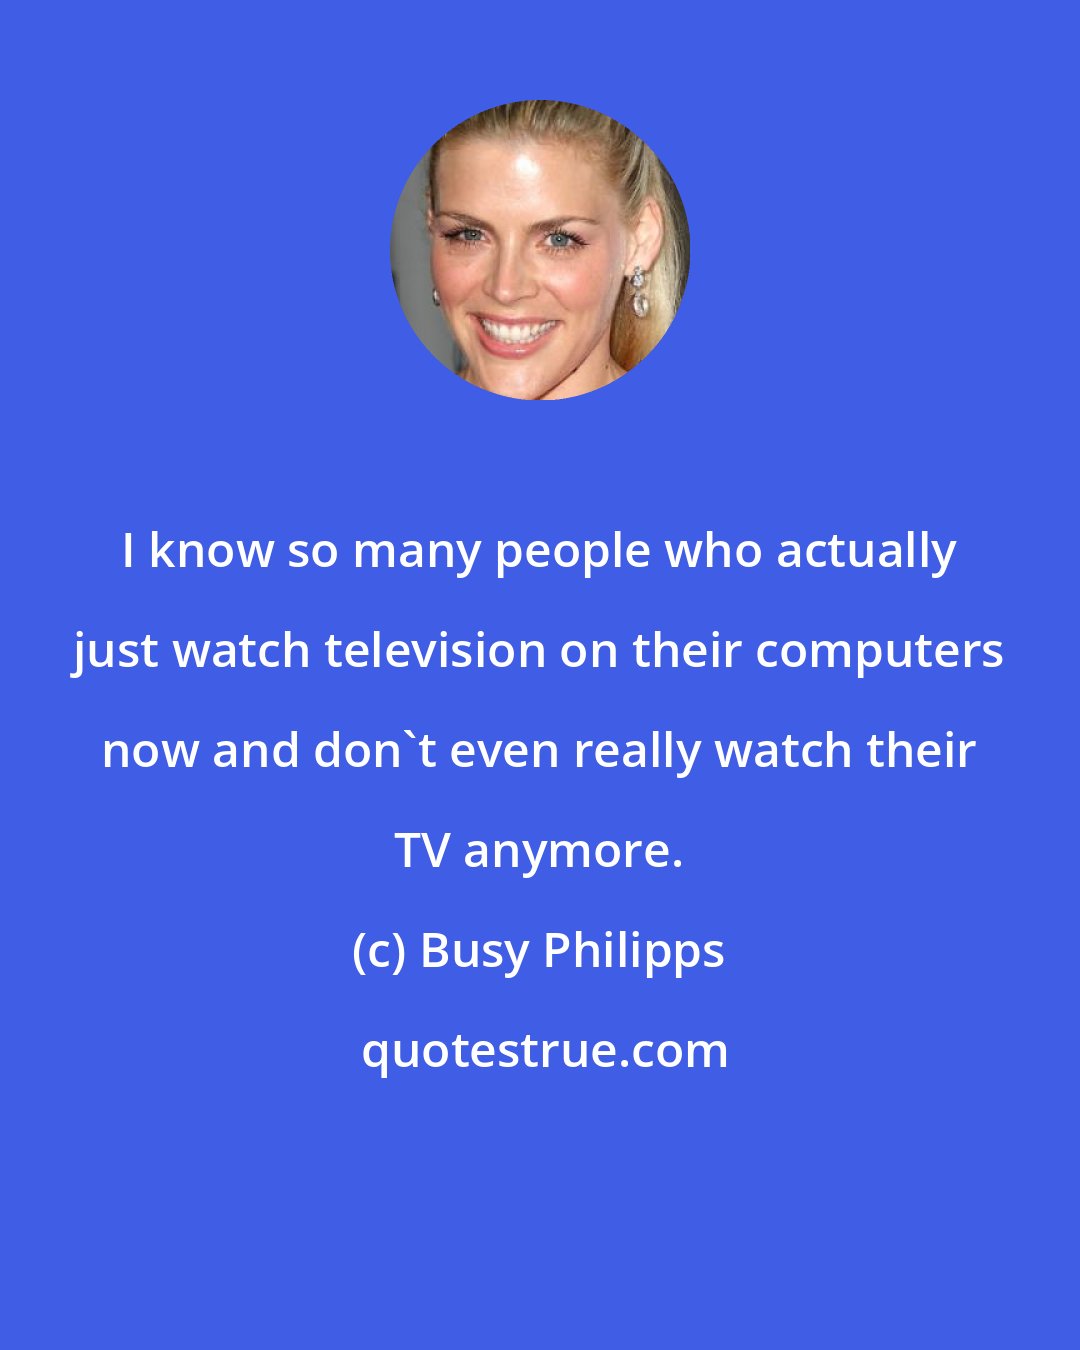 Busy Philipps: I know so many people who actually just watch television on their computers now and don't even really watch their TV anymore.